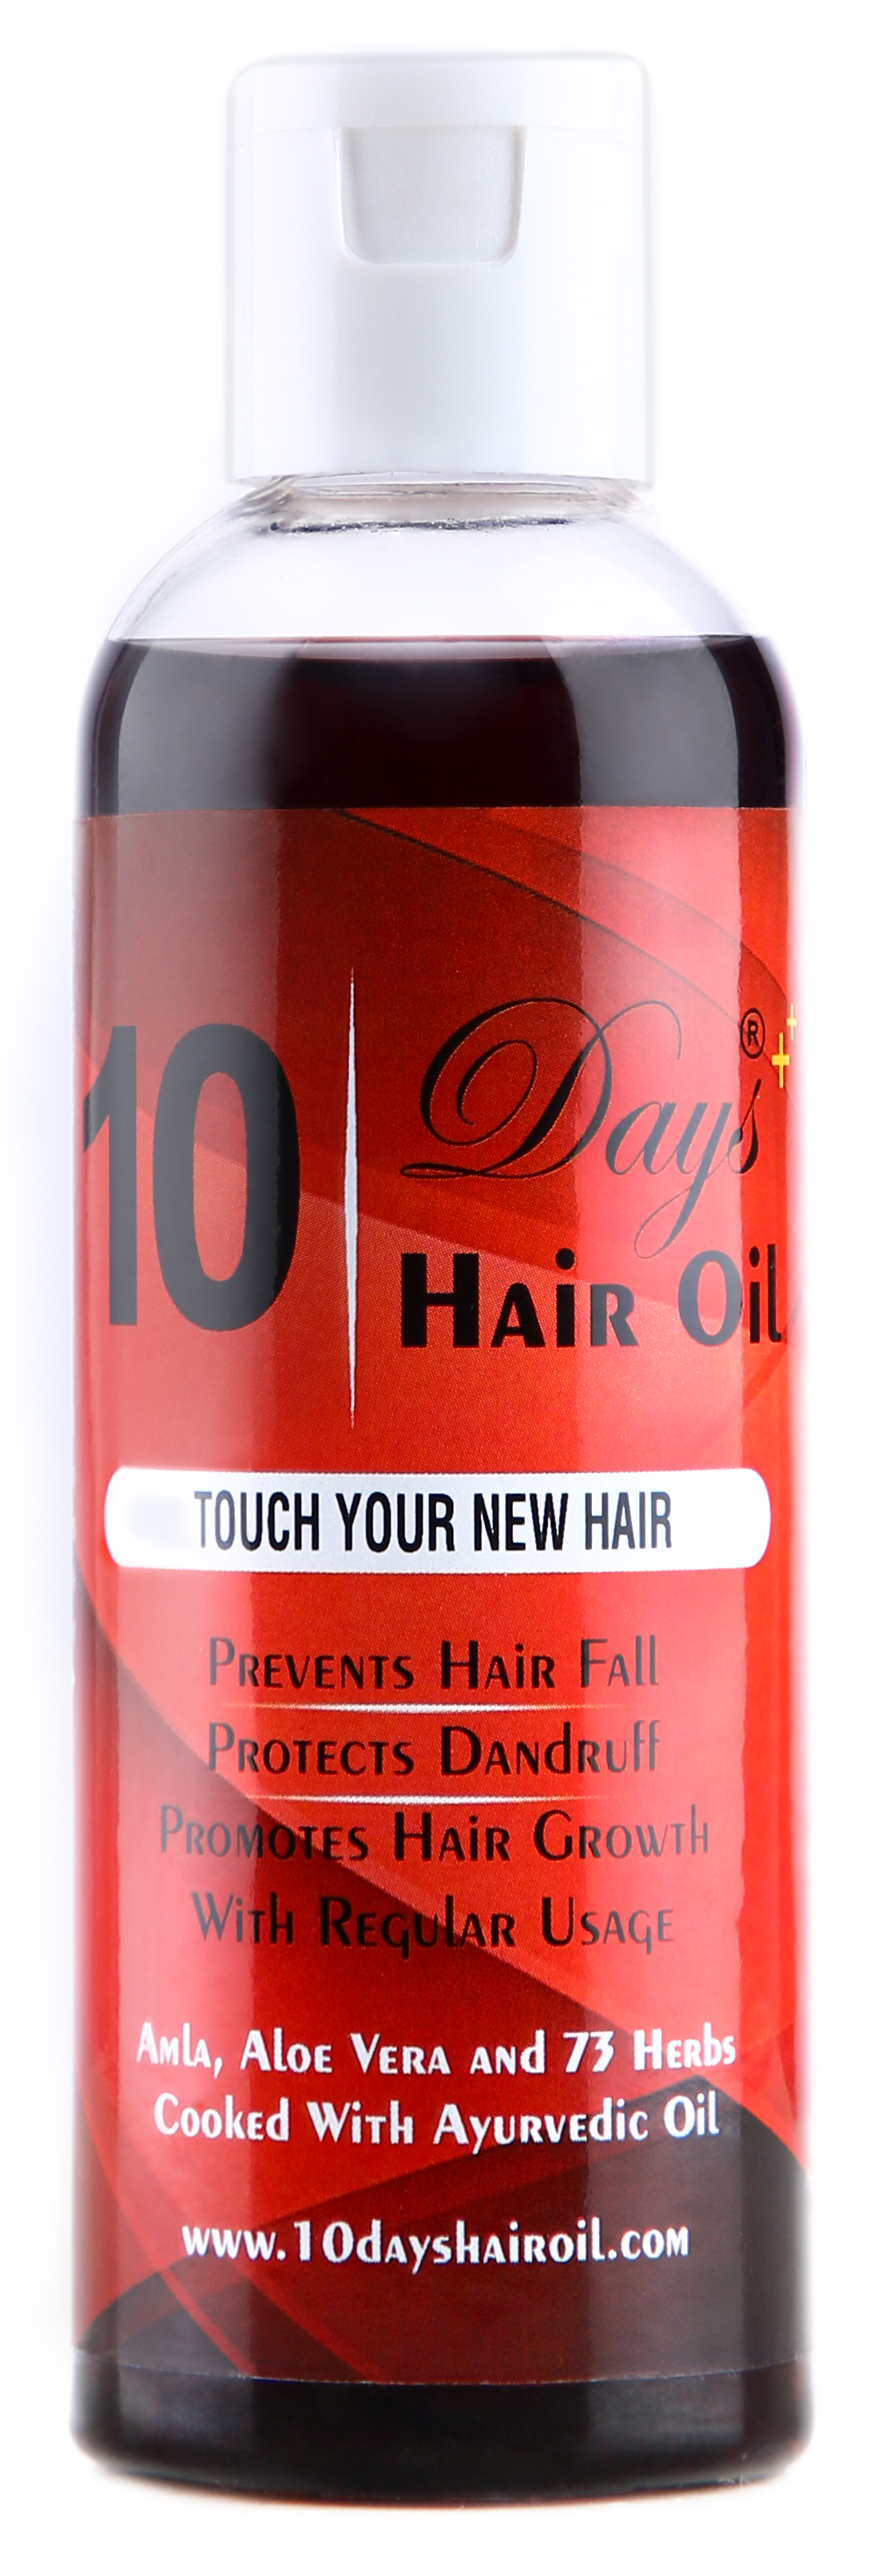 Buy Original 10 Days Hair Oil For Men and Women With True Amazon's Plant  Extracts (200ML) Online at Low Prices in India - Amazon.in